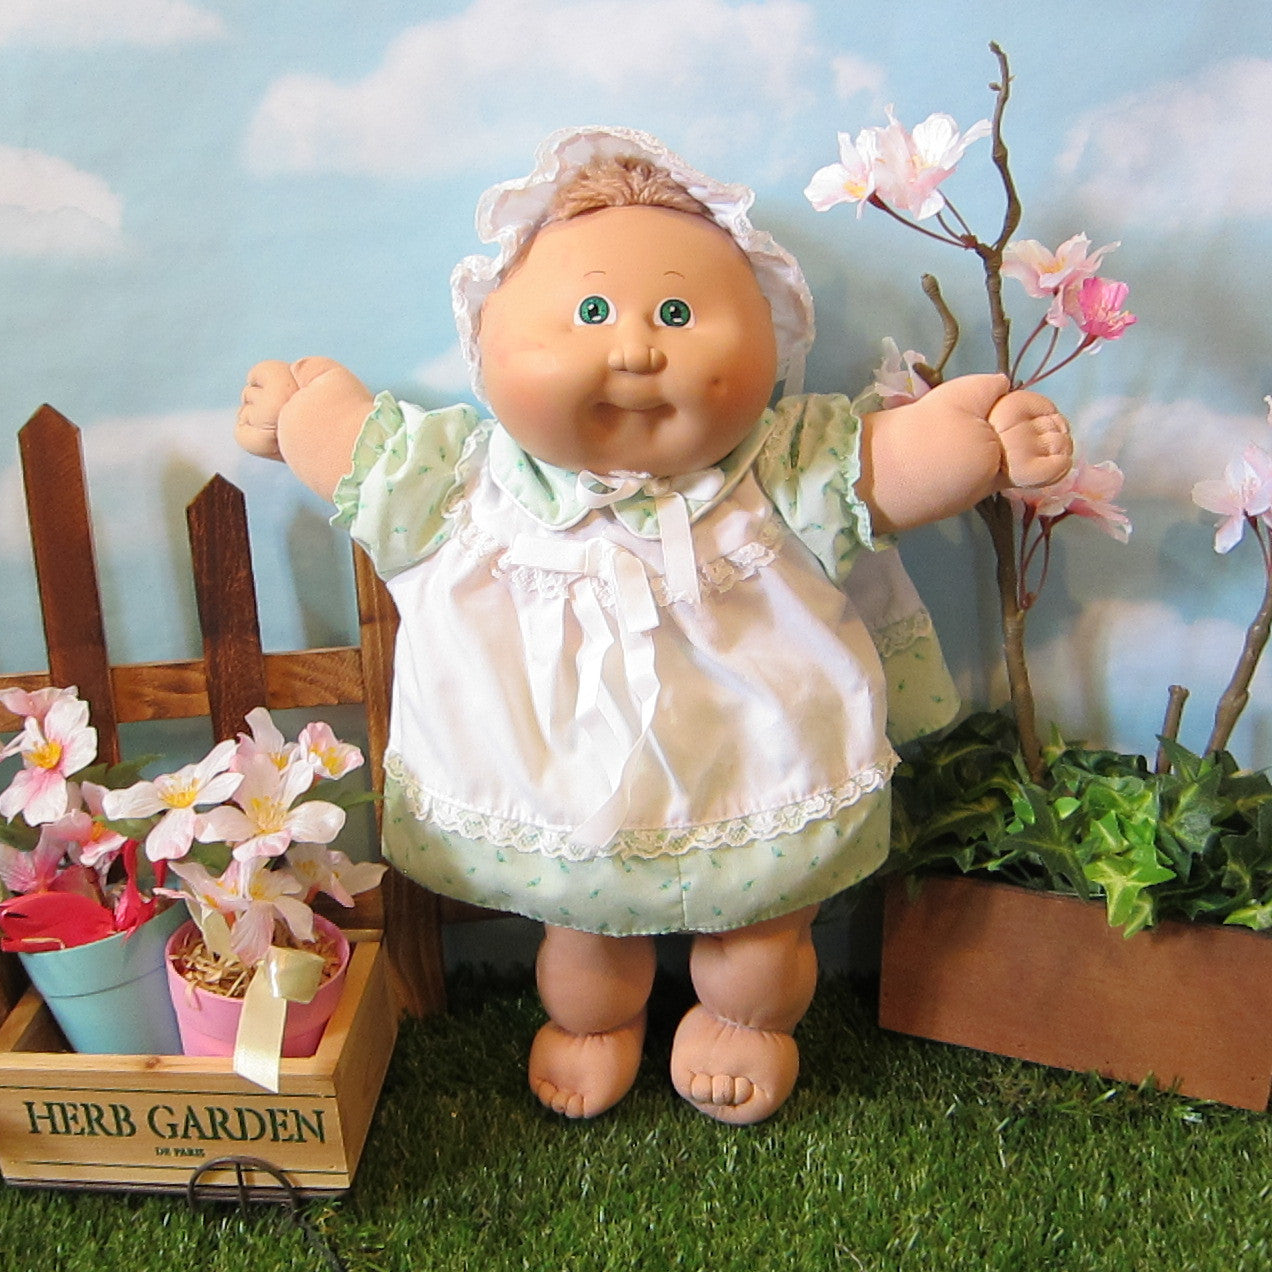 Cabbage Patch Kids Preemie girl doll with light brown hair, green eyes, dimple